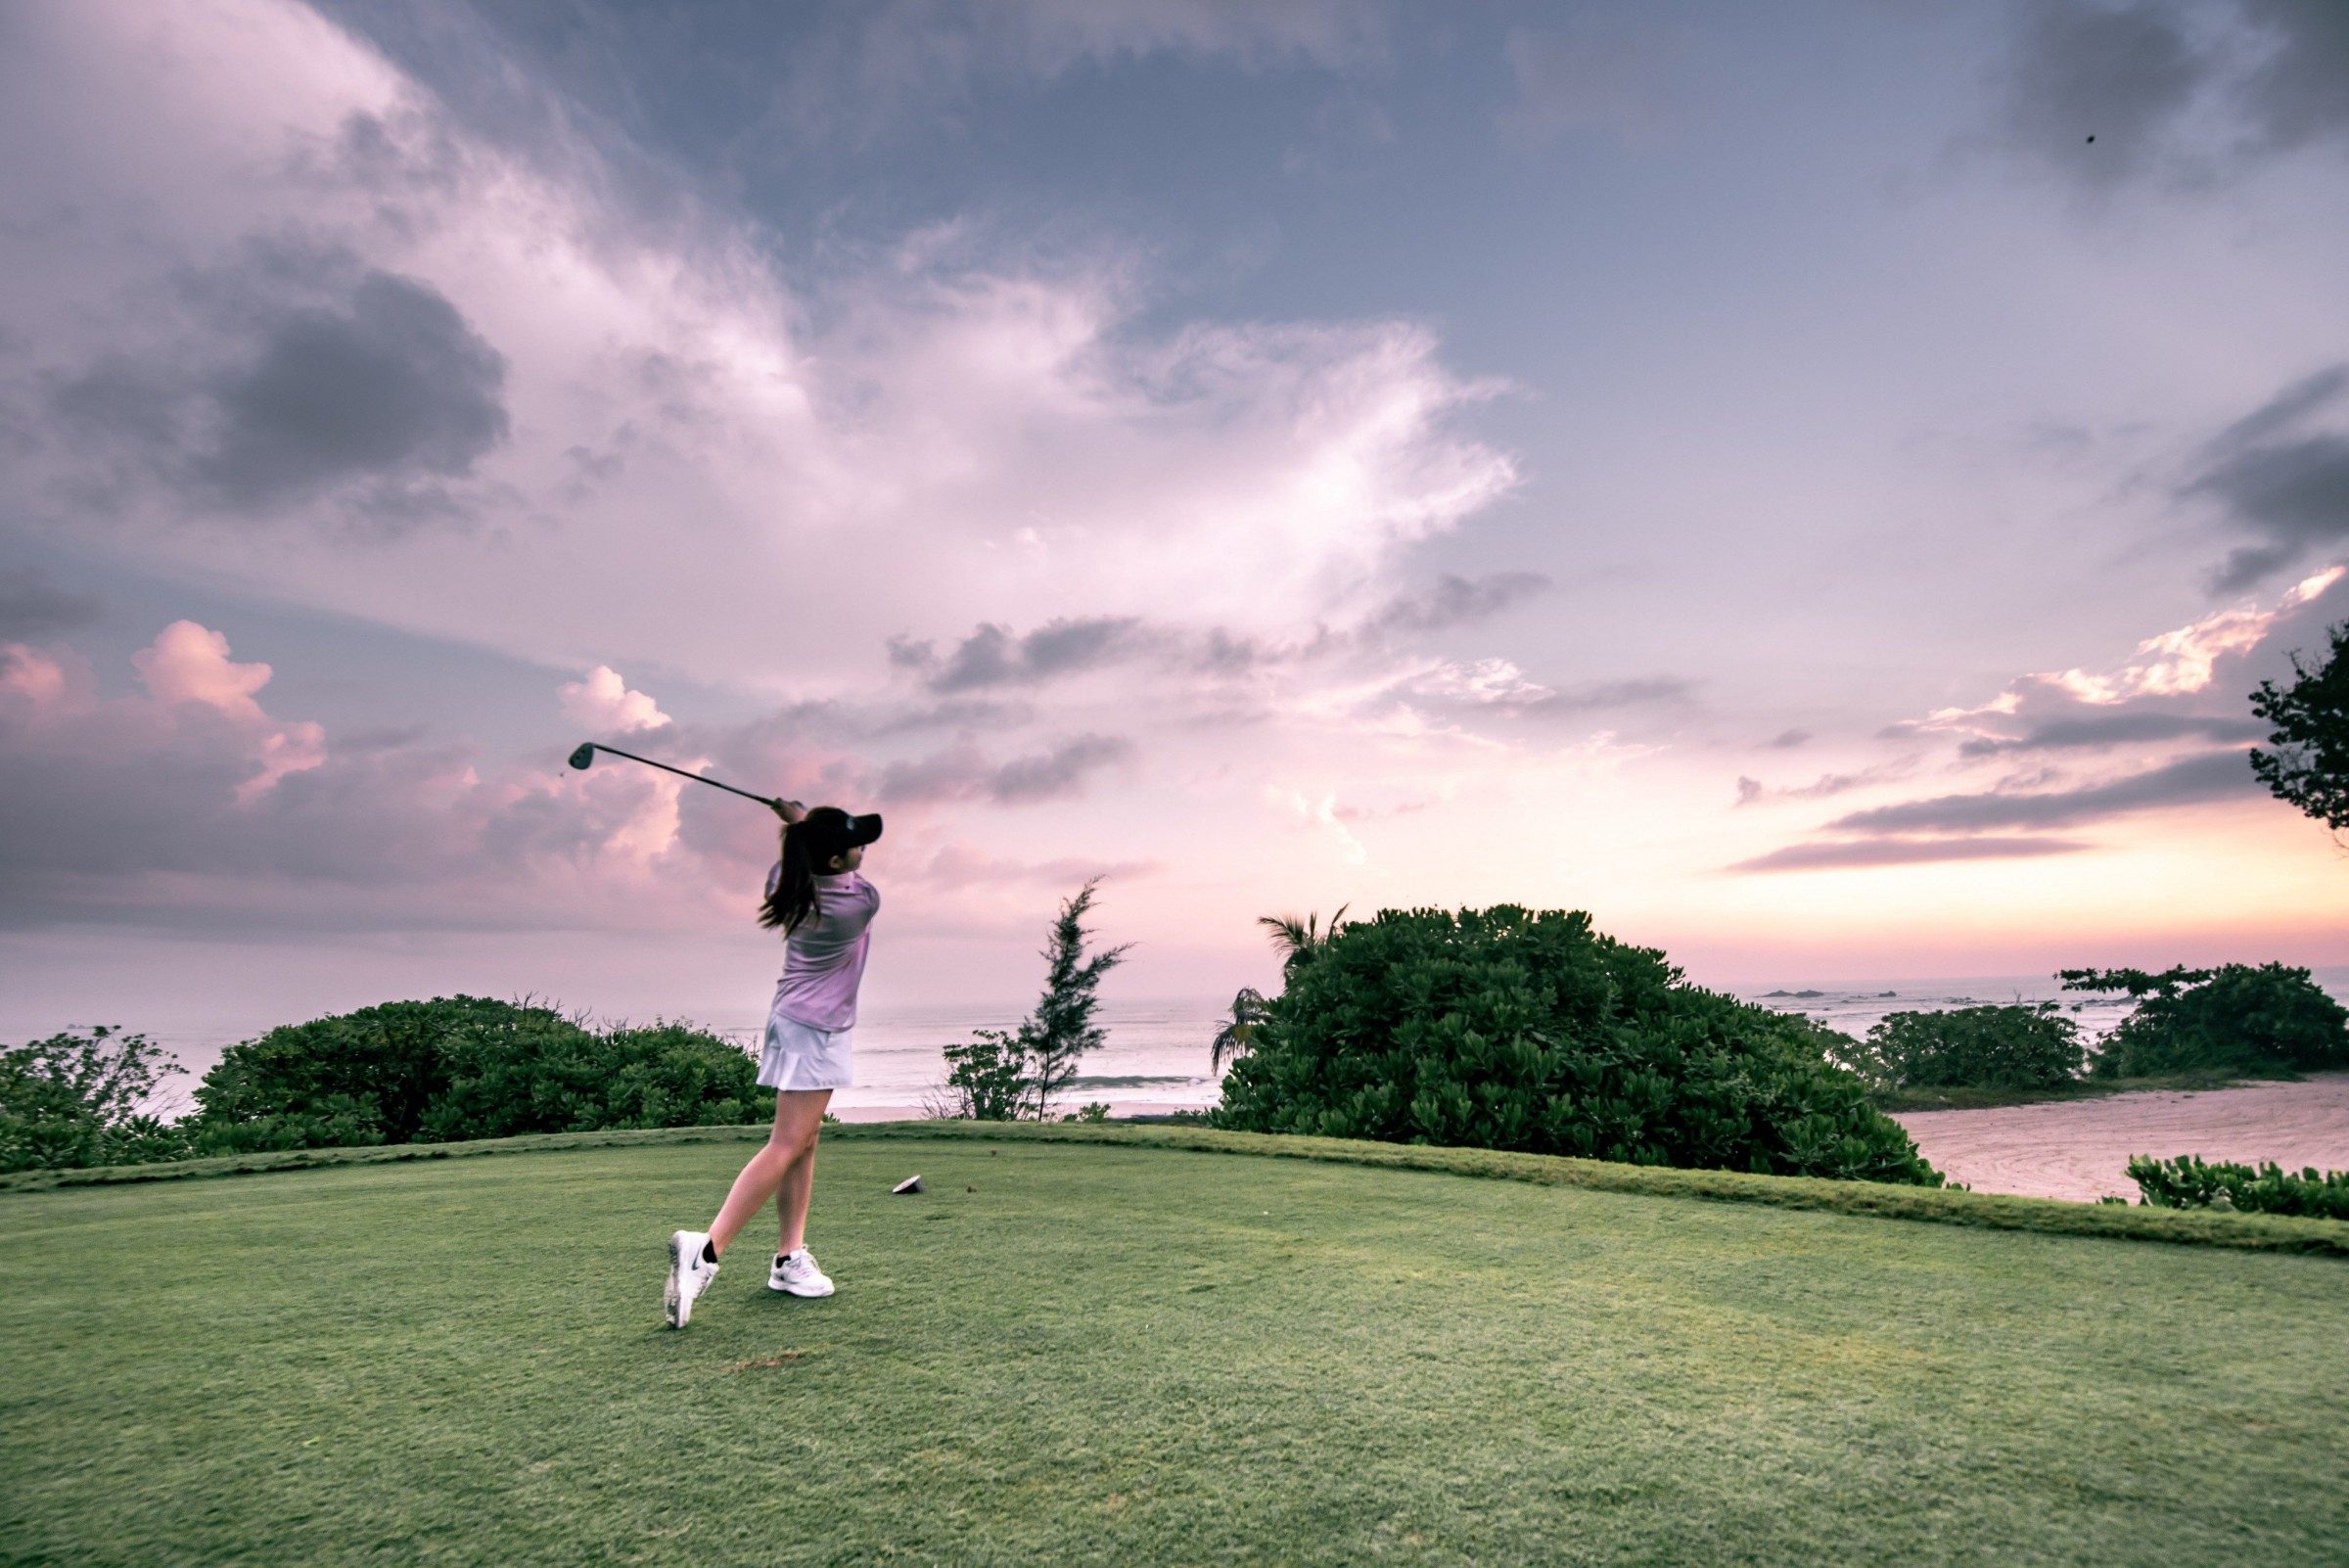 Malaysia’s Best Golf Course by World Golf Awards for the Second Consecutive Year